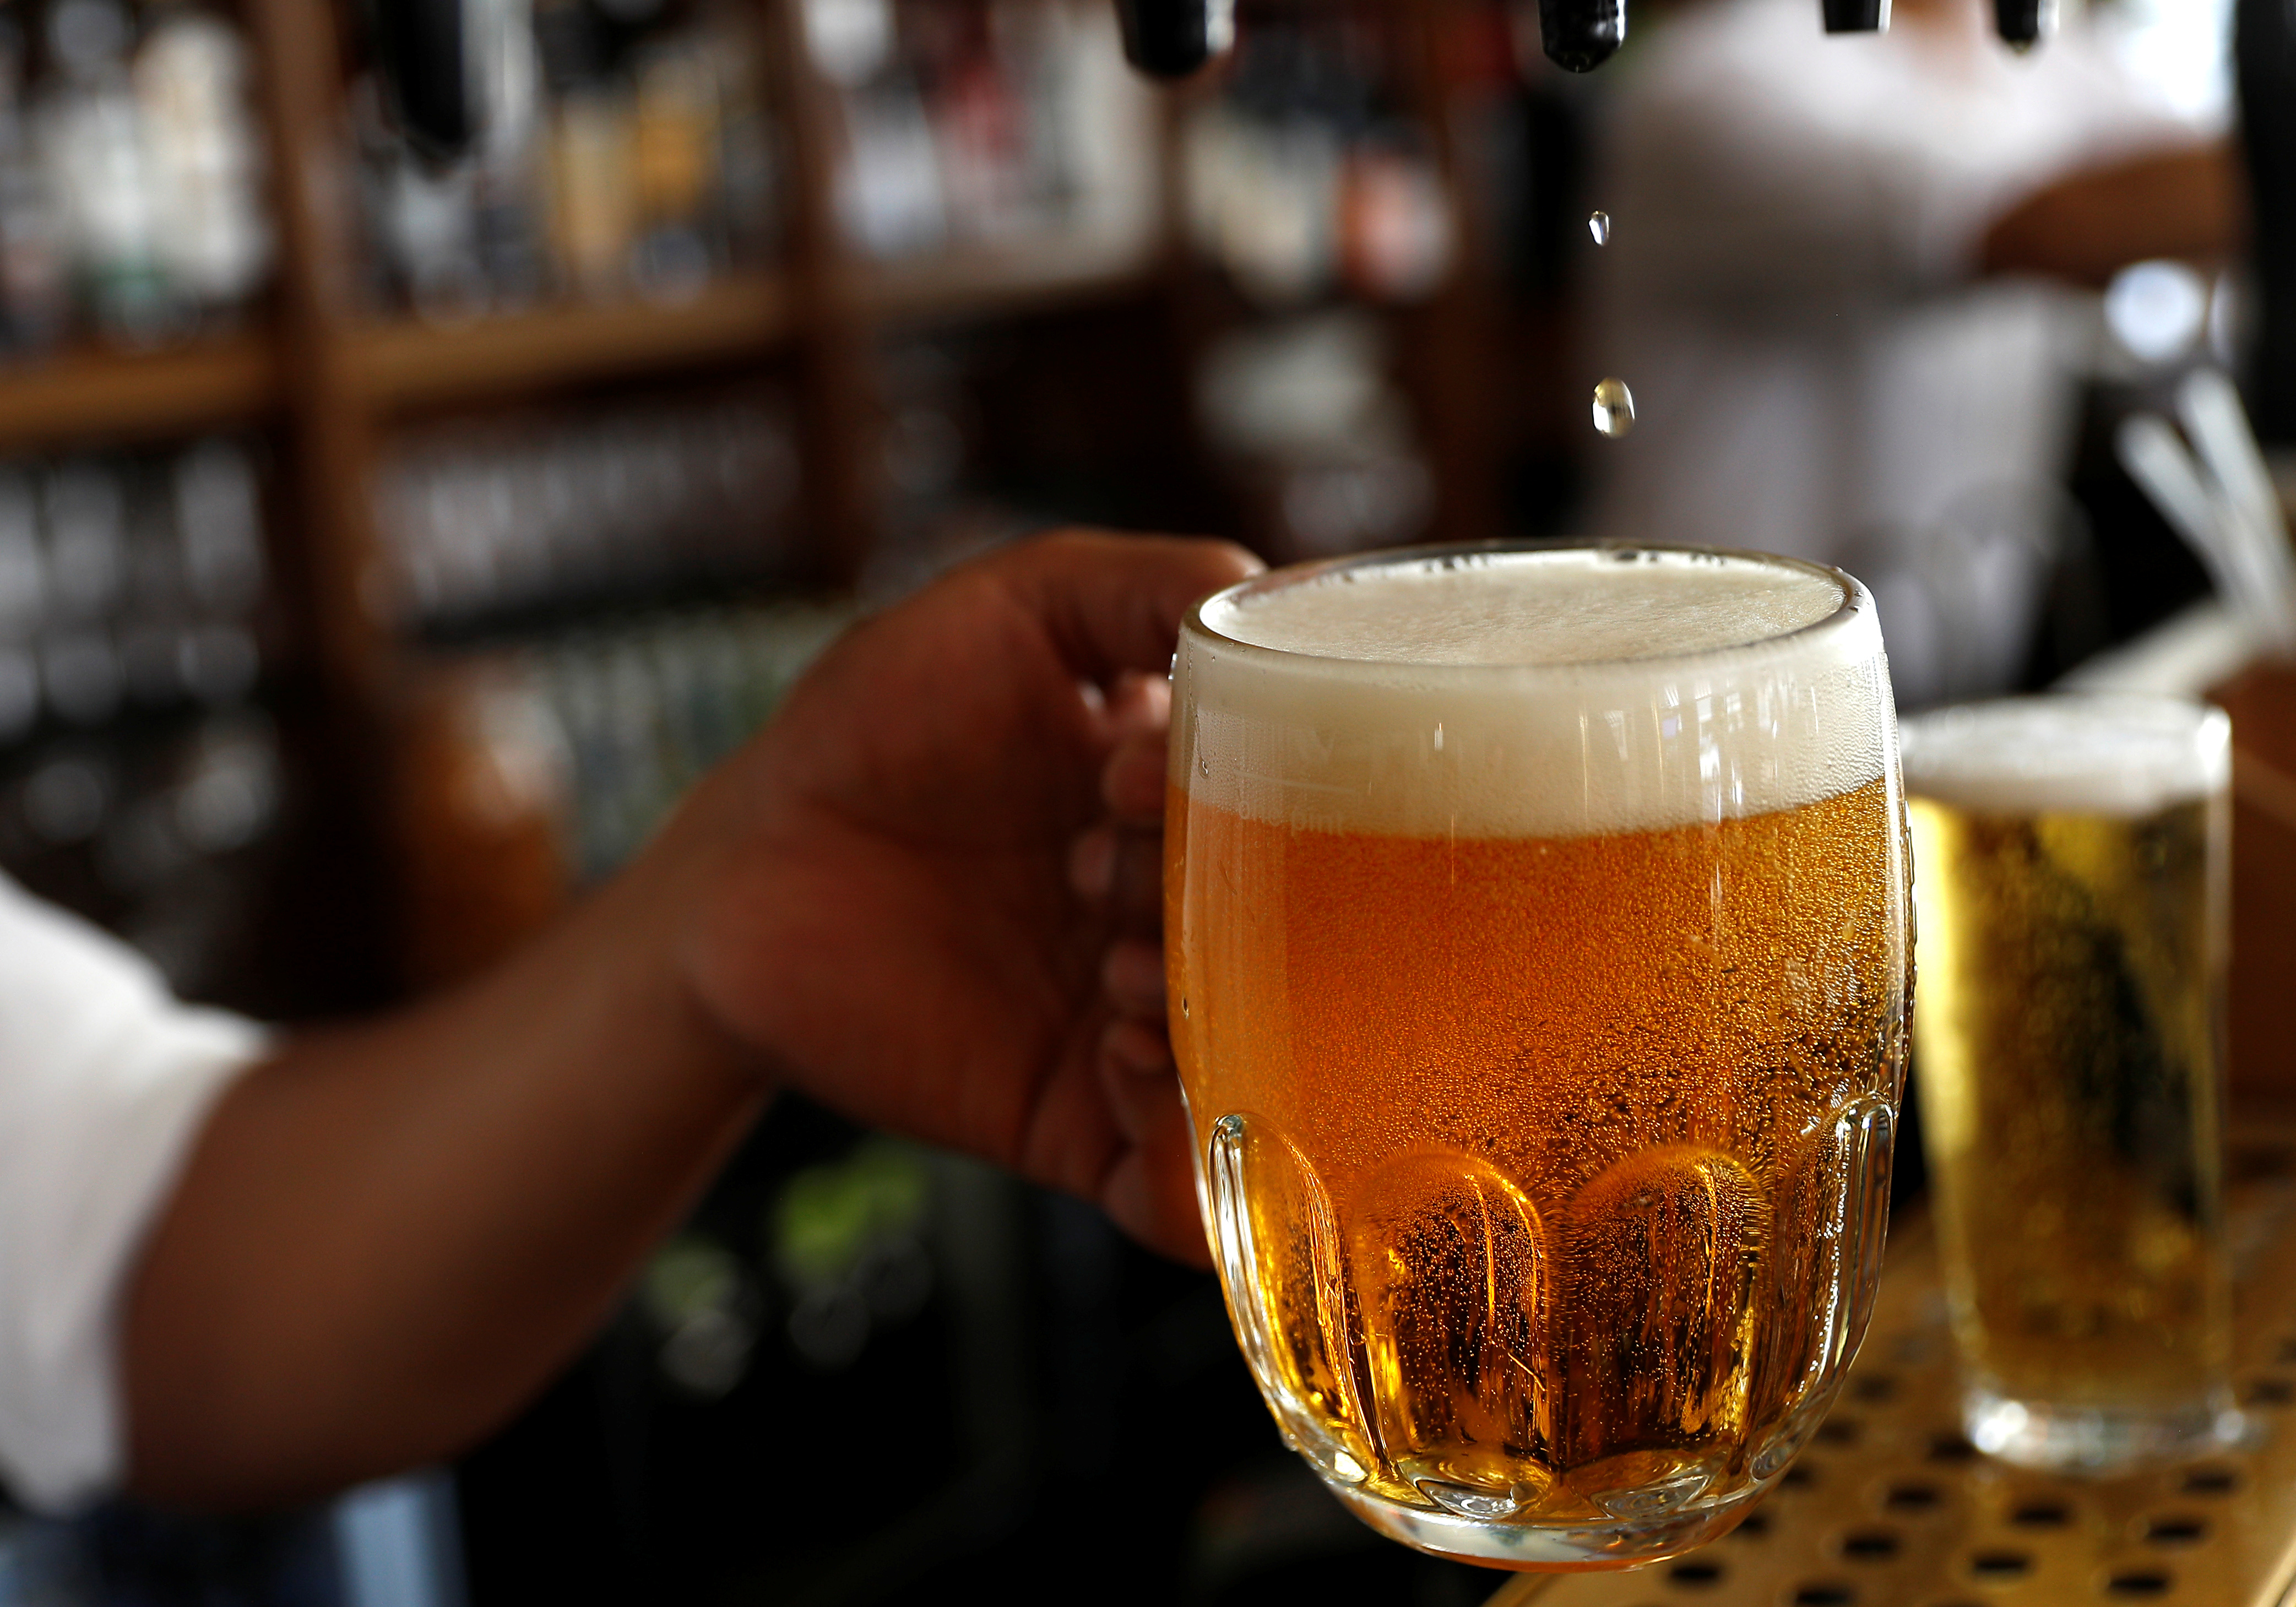 A pint of beer is poured into a glass in a bar in London